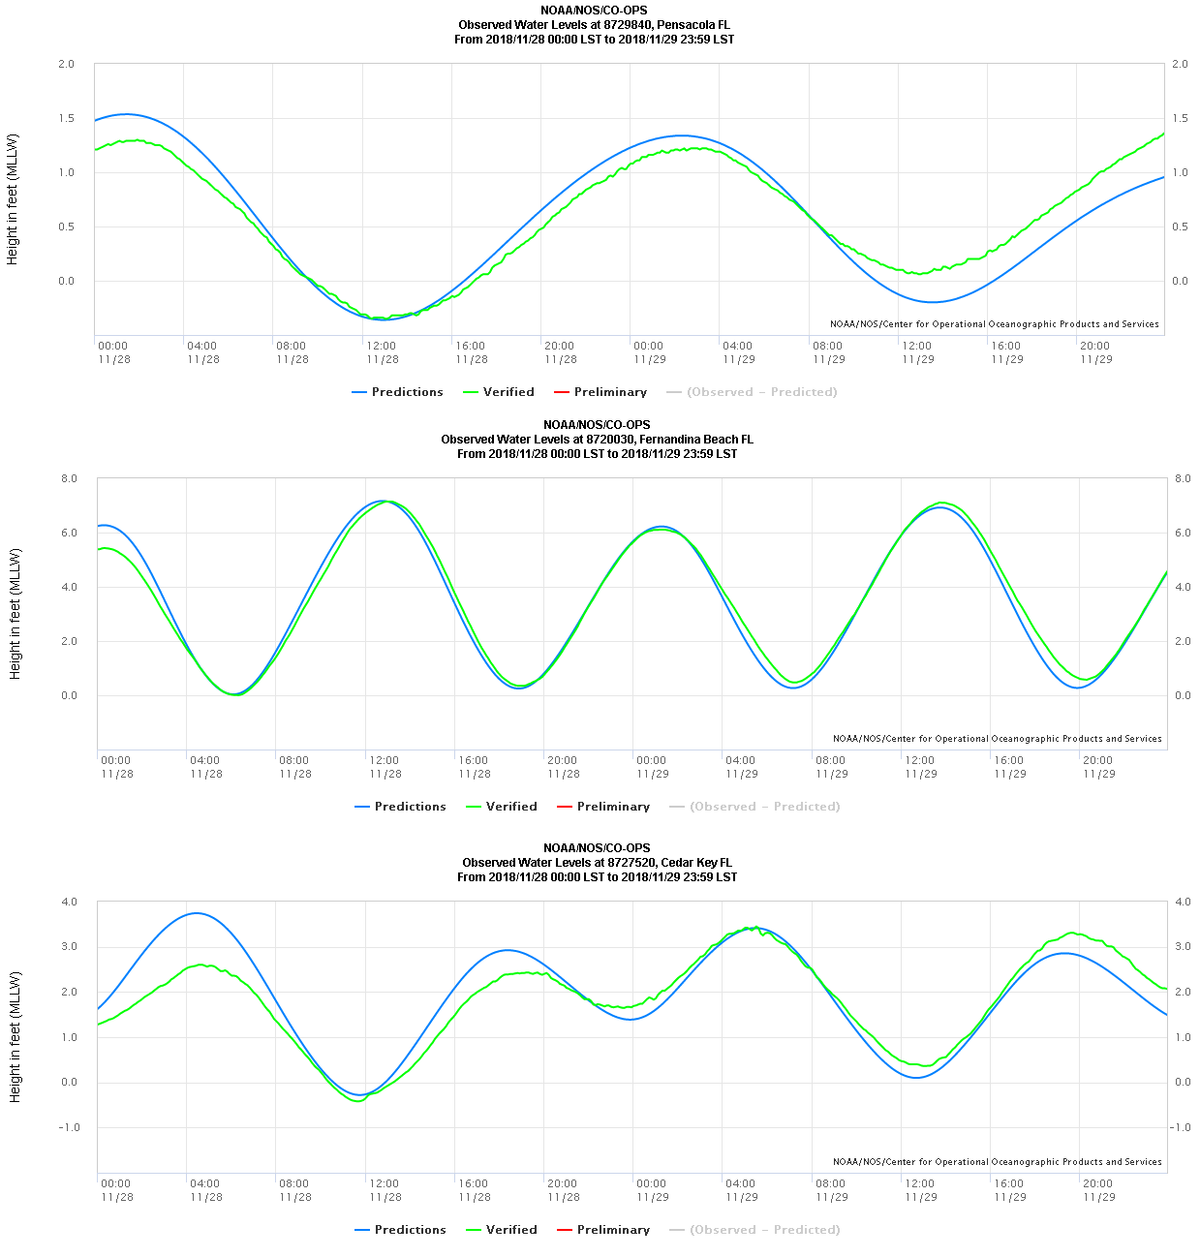 NOAA/NOS/CO-OPS
Observed Water Levels at 8729840, Pensacola FL
From 2018/11/28 00:00 LST to 2018/11/29 23:59 LST
2.0
2.0
1.5
1.5
1.0
1.0
0.5
0.5
0.0
0.0
NOAA/NOS/Center for Operational Oceanographic Products and Services
20:00
11/28
00:00
04:00
08:00
12:00
16:00
00:00
04:00
08:00
12:00
16:00
20:00
11/28
11/28
11/28
11/28
11/28
11/29
11/29
11/29
11/29
11/29
11/29
- Predictions
- Verified
- Preliminary
- (Observed - Predicted)
NOAANOS/CO-OPS
Observed Water Levels at 8720030, Fernandina Beach FL
From 2018/11/28 00:00 LST to 2018/11/29 23:59 LST
8.0
8.0
6.0
6.0
4.0
4.0
2.0
2.0
0.0
0.0
NOAA/ NOS/Center for Operational Oceanographic Products and Services
00:00
11/28
04:00
11/28
20:00
11/28
00:00
11/29
04:00
11/29
08:00
12:00
16:00
08:00
12:00
16:00
20:00
11/28
11/28
11/28
11/29
11/29
11/29
11/29
- Predictions
- Verified
- Preliminary
(Observed - Predicted)
NOAANOS/CO-OPS
Observed Water Levels at 8727520, Cedar Key FL
From 2018/11/28 00:00 LST to 2018/11/29 23:59 LST
4.0
4.0
3.0
3.0
2.0
2.0
1.0
1.0
0.0
0.0
-1.0
-1.0
NOAA/NOS/Center for Operational Oceanographic Products and Services
04:00
11/28
08:00
11/28
12:00
11/28
20:00
11/28
00:00
11/29
04:00
11/29
08:00
11/29
00:00
16:00
12:00
16:00
20:00
11/28
11/28
11/29
11/29
11/29
- Predictions
- Verified
- Preliminary
(Observed - Predicted)
Height in feet (MLLW)
Height in feet (MLLW)
Height in feet (MLLW)
